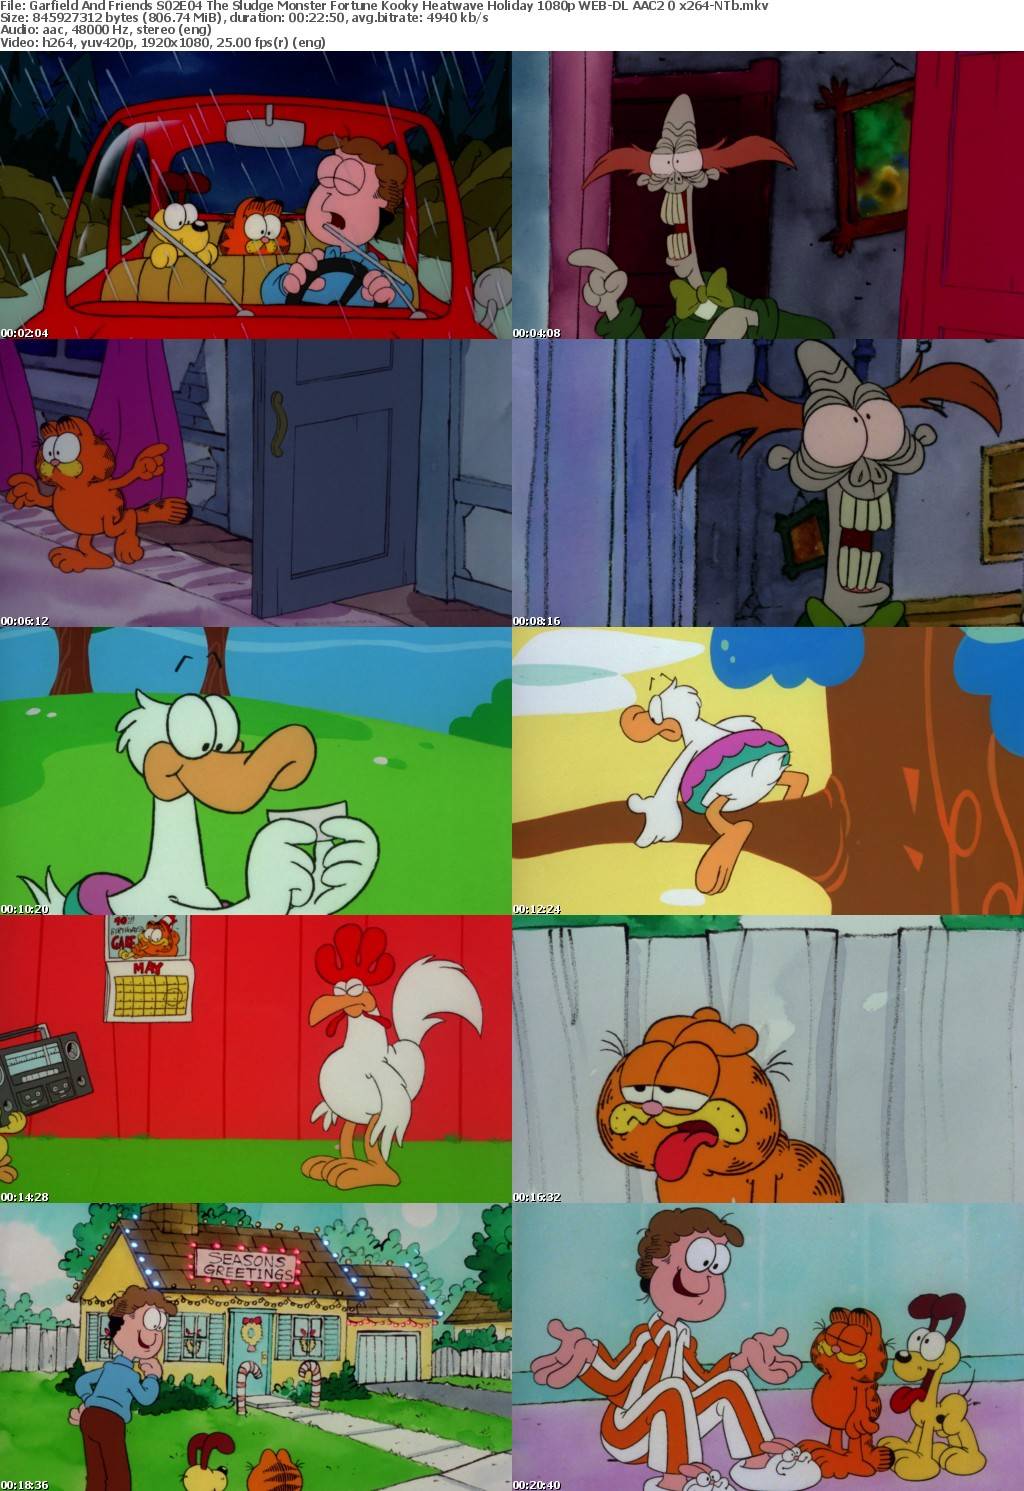 Garfield And Friends S02E04 The Sludge Monster Fortune Kooky Heatwave Holiday 1080p WEB-DL AAC2 0 x264-NTb